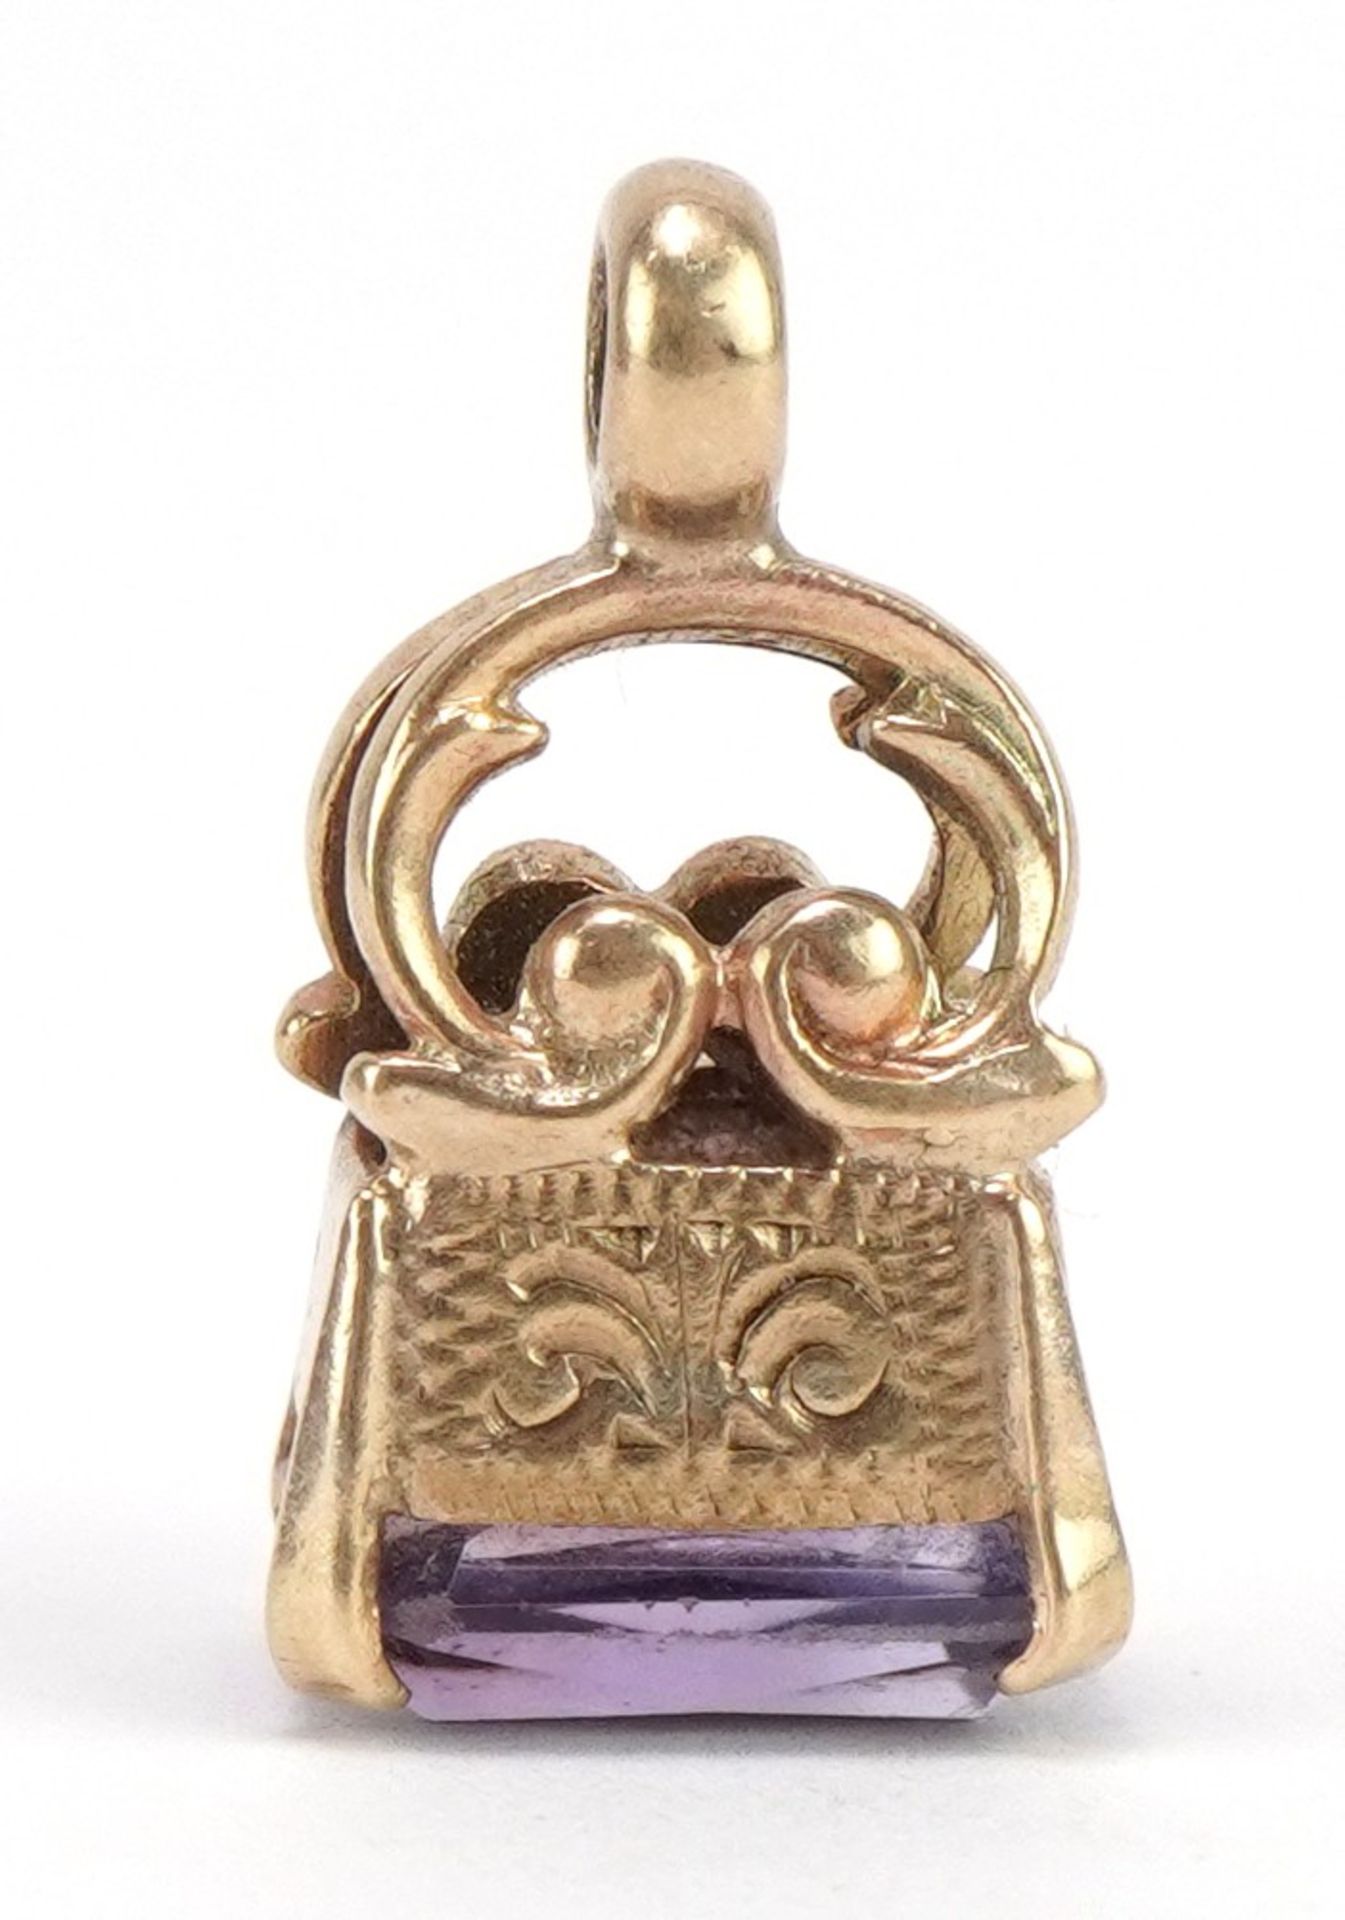 9ct gold amethyst seal fob, 1.9cm high, 2.5g : For further information on this lot please contact